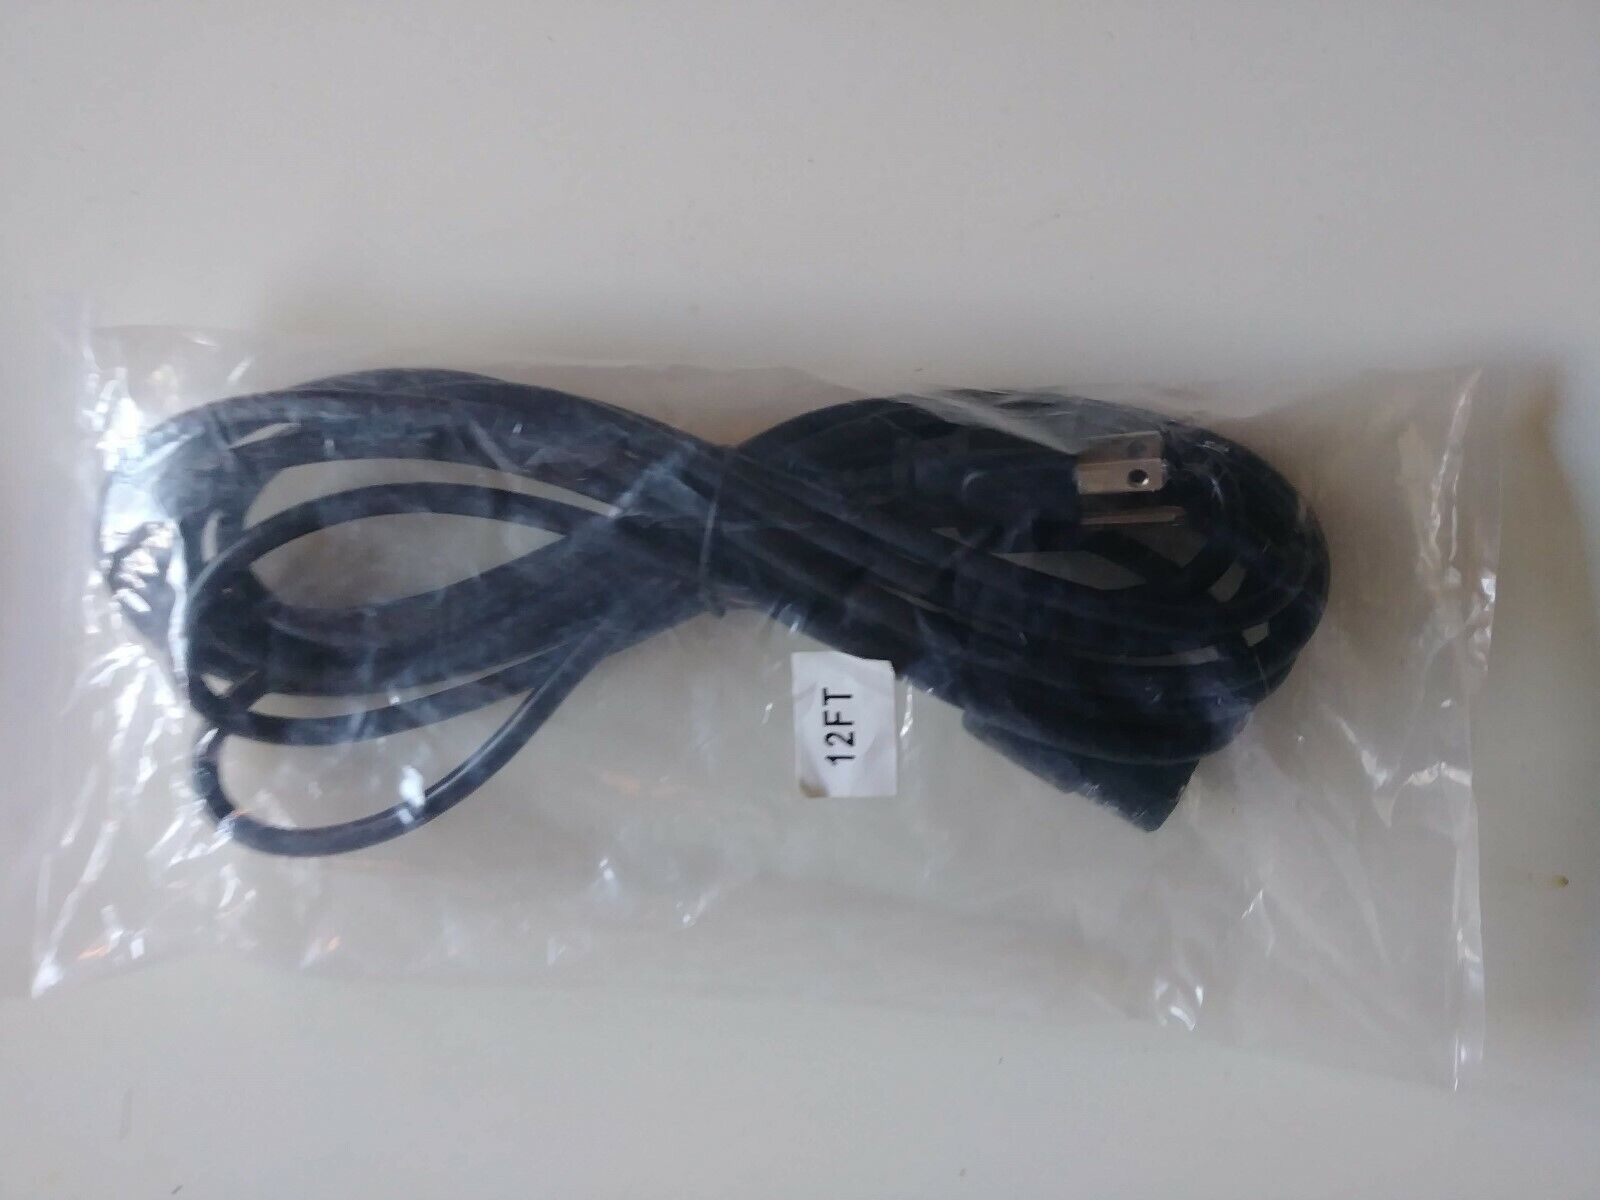 12 foot server power cord - NEW